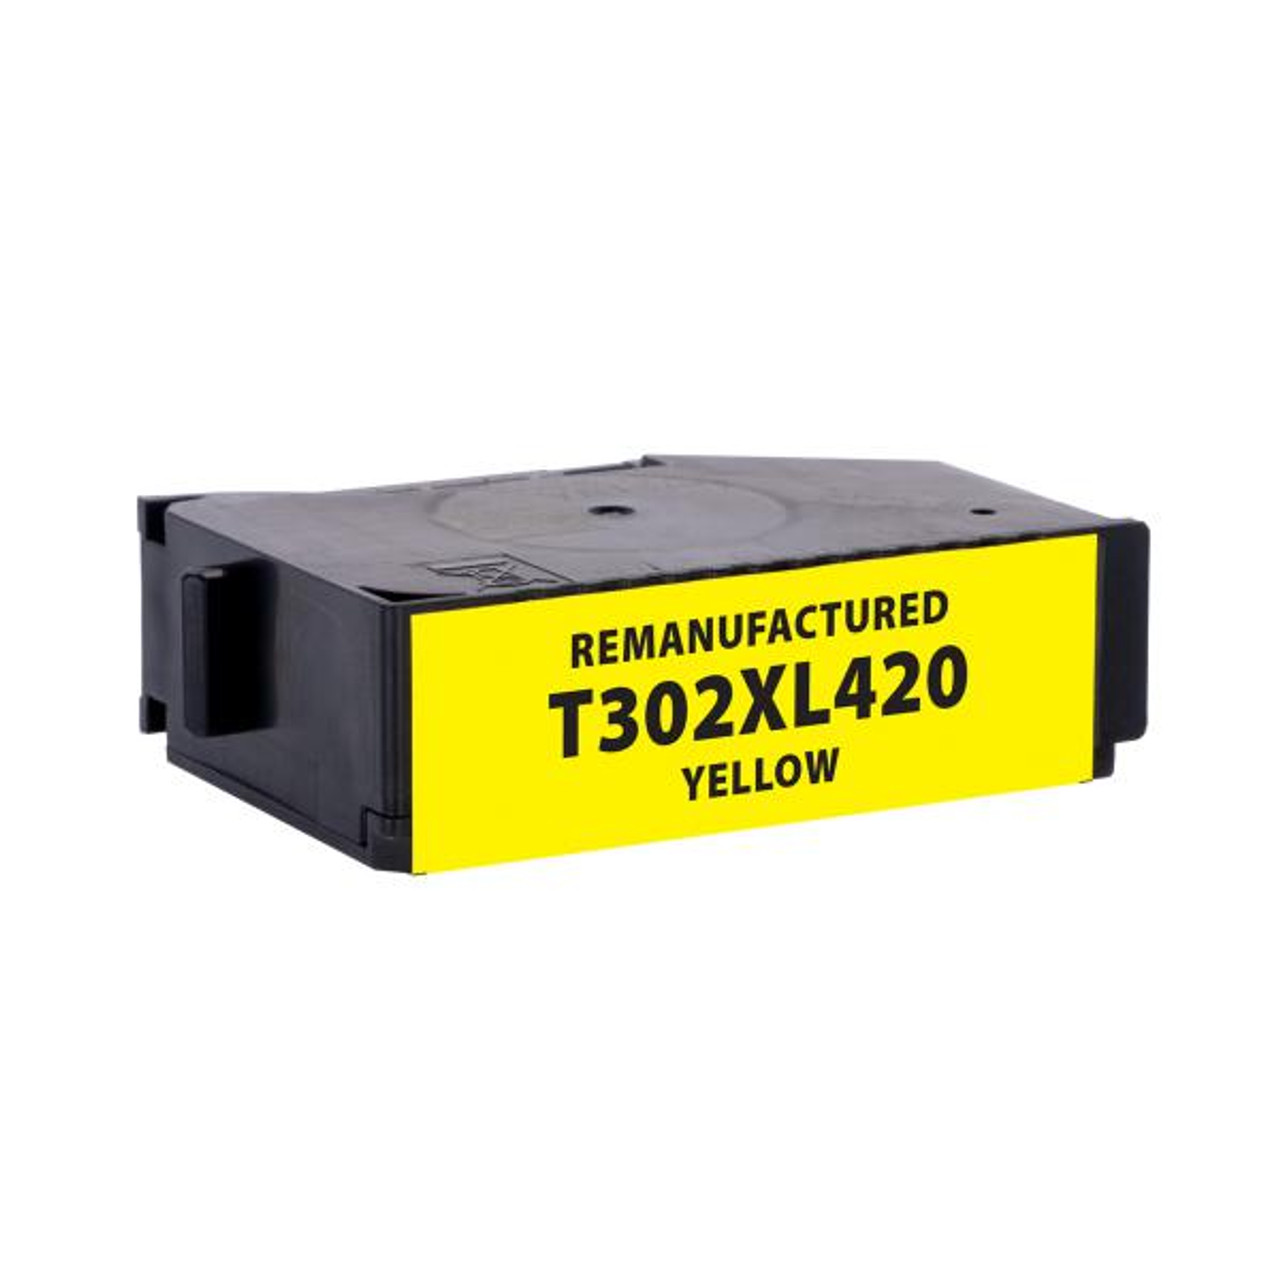 High Capacity Yellow Ink Cartridge for Epson T302XL420-1